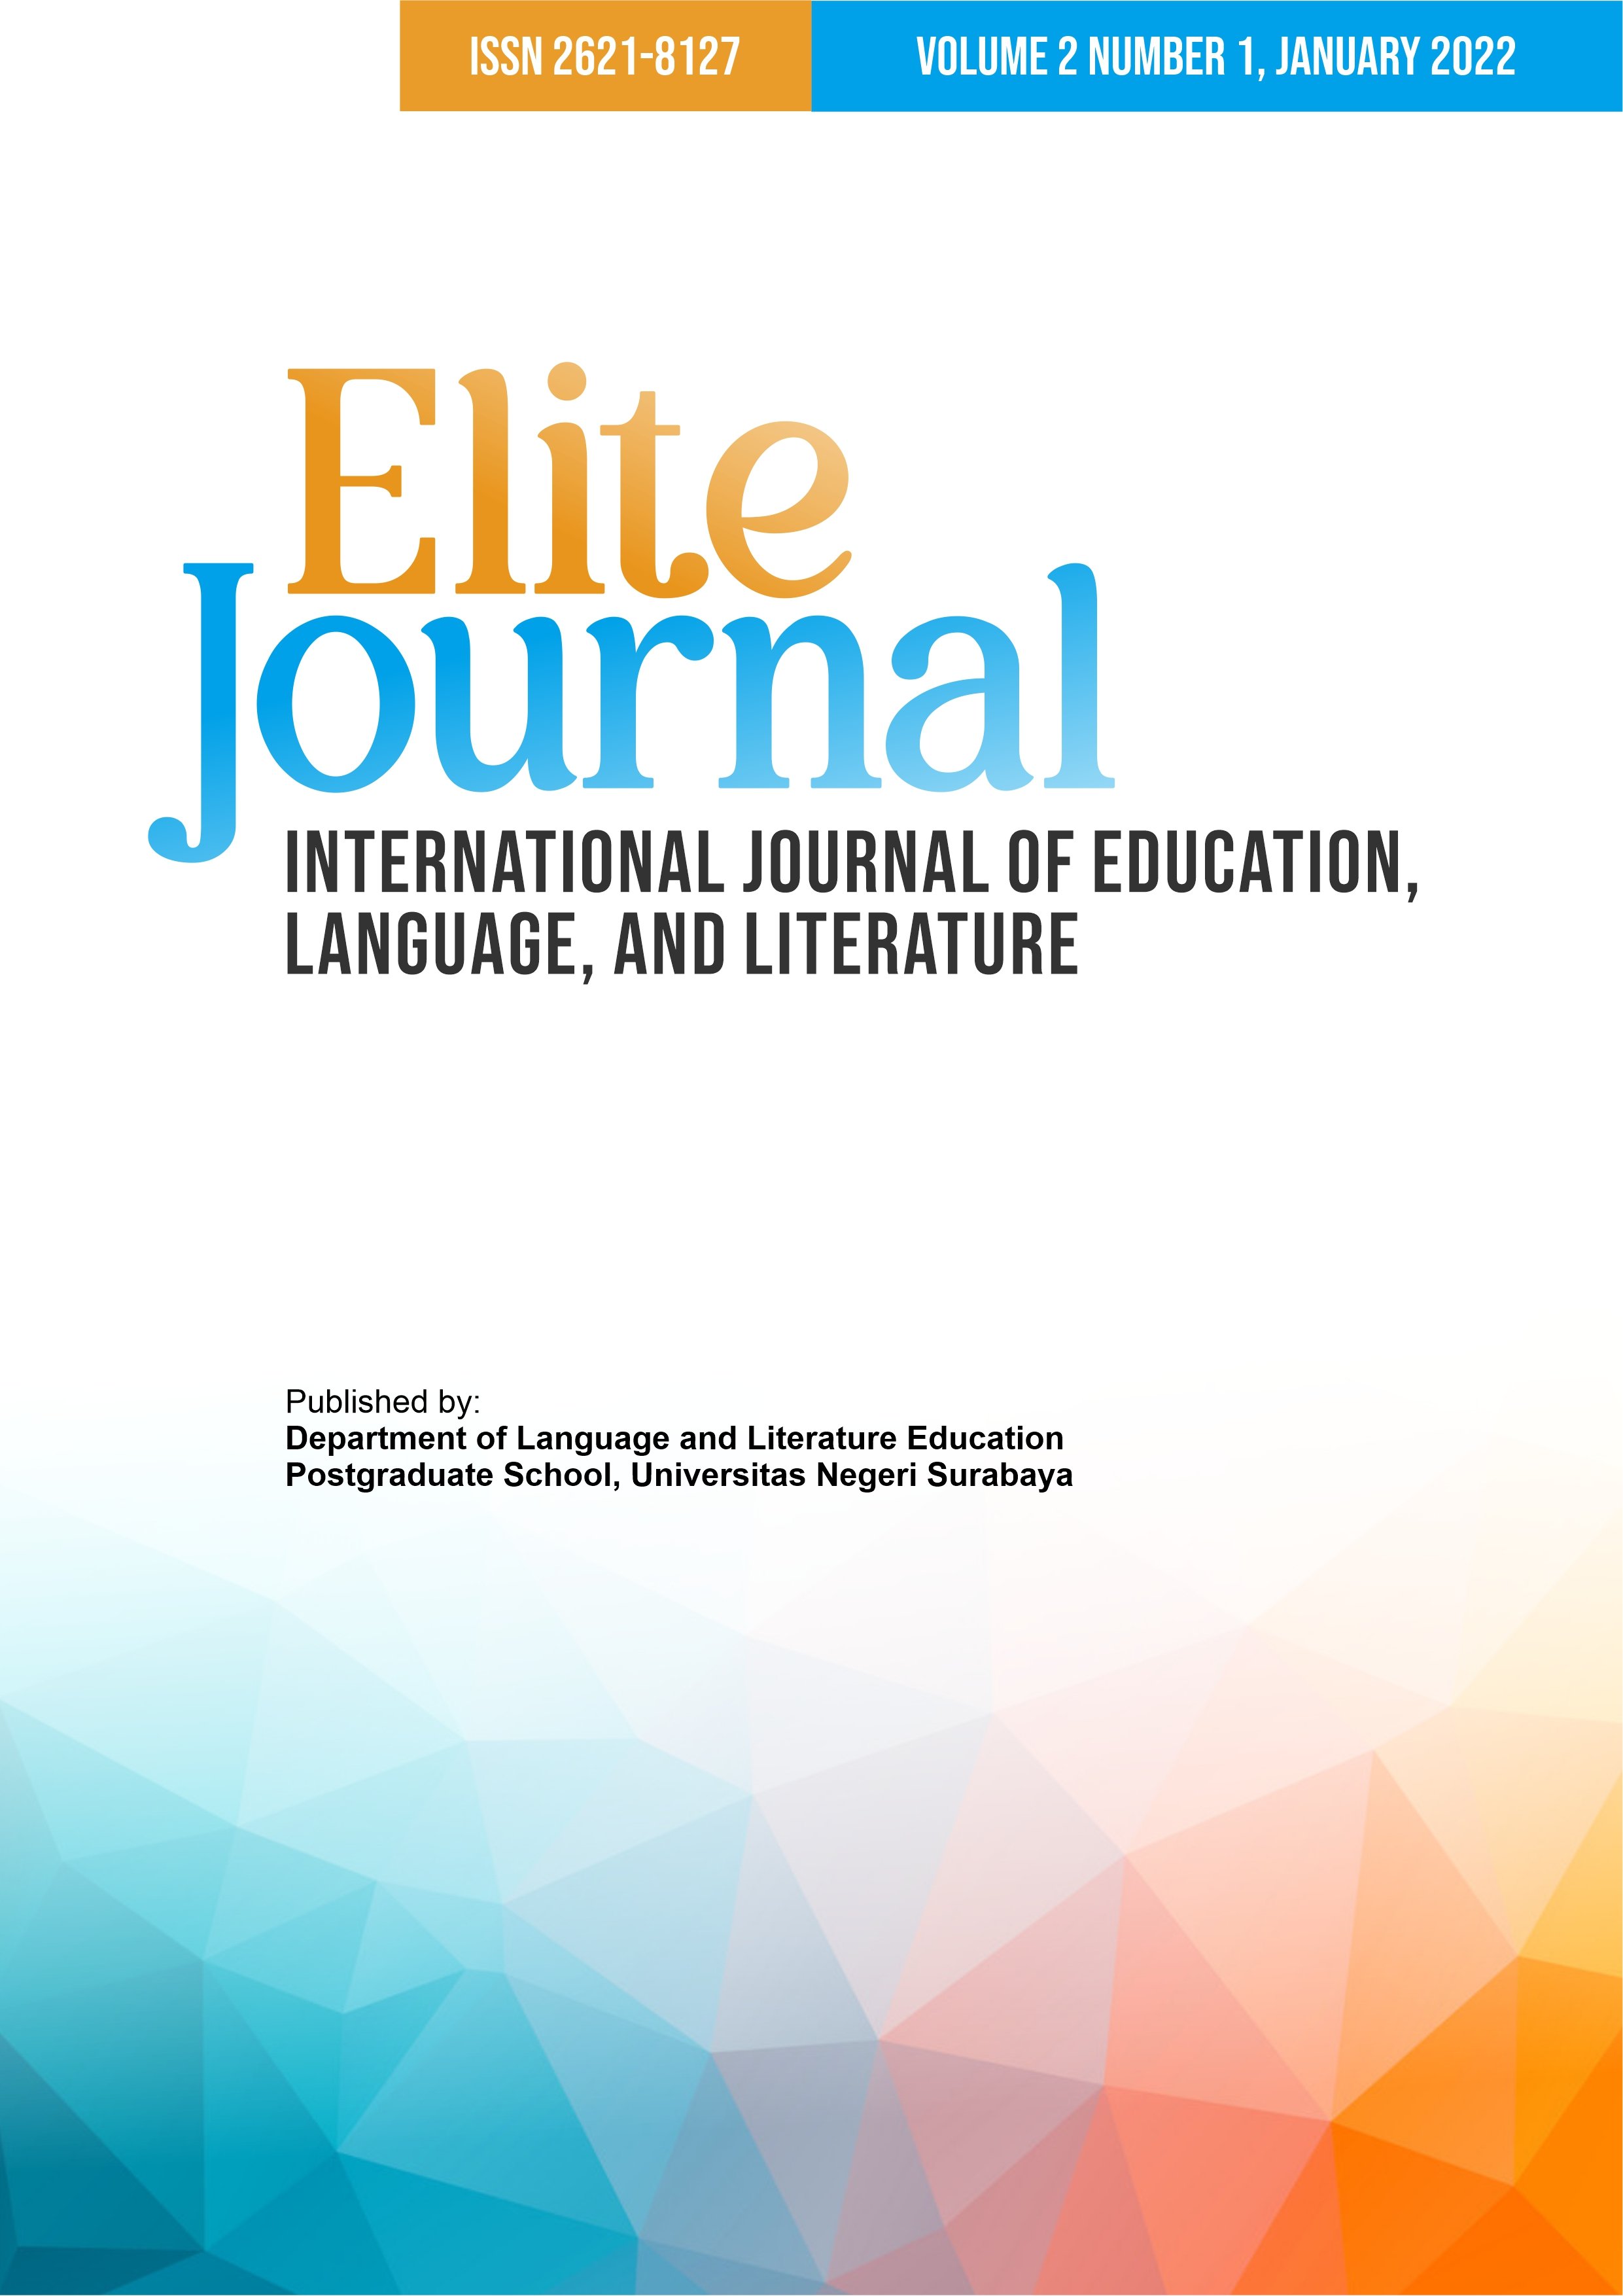 					View Vol. 2 No. 1 (2022): ELite Journal (Volume 2 Number 1, January 2022)
				